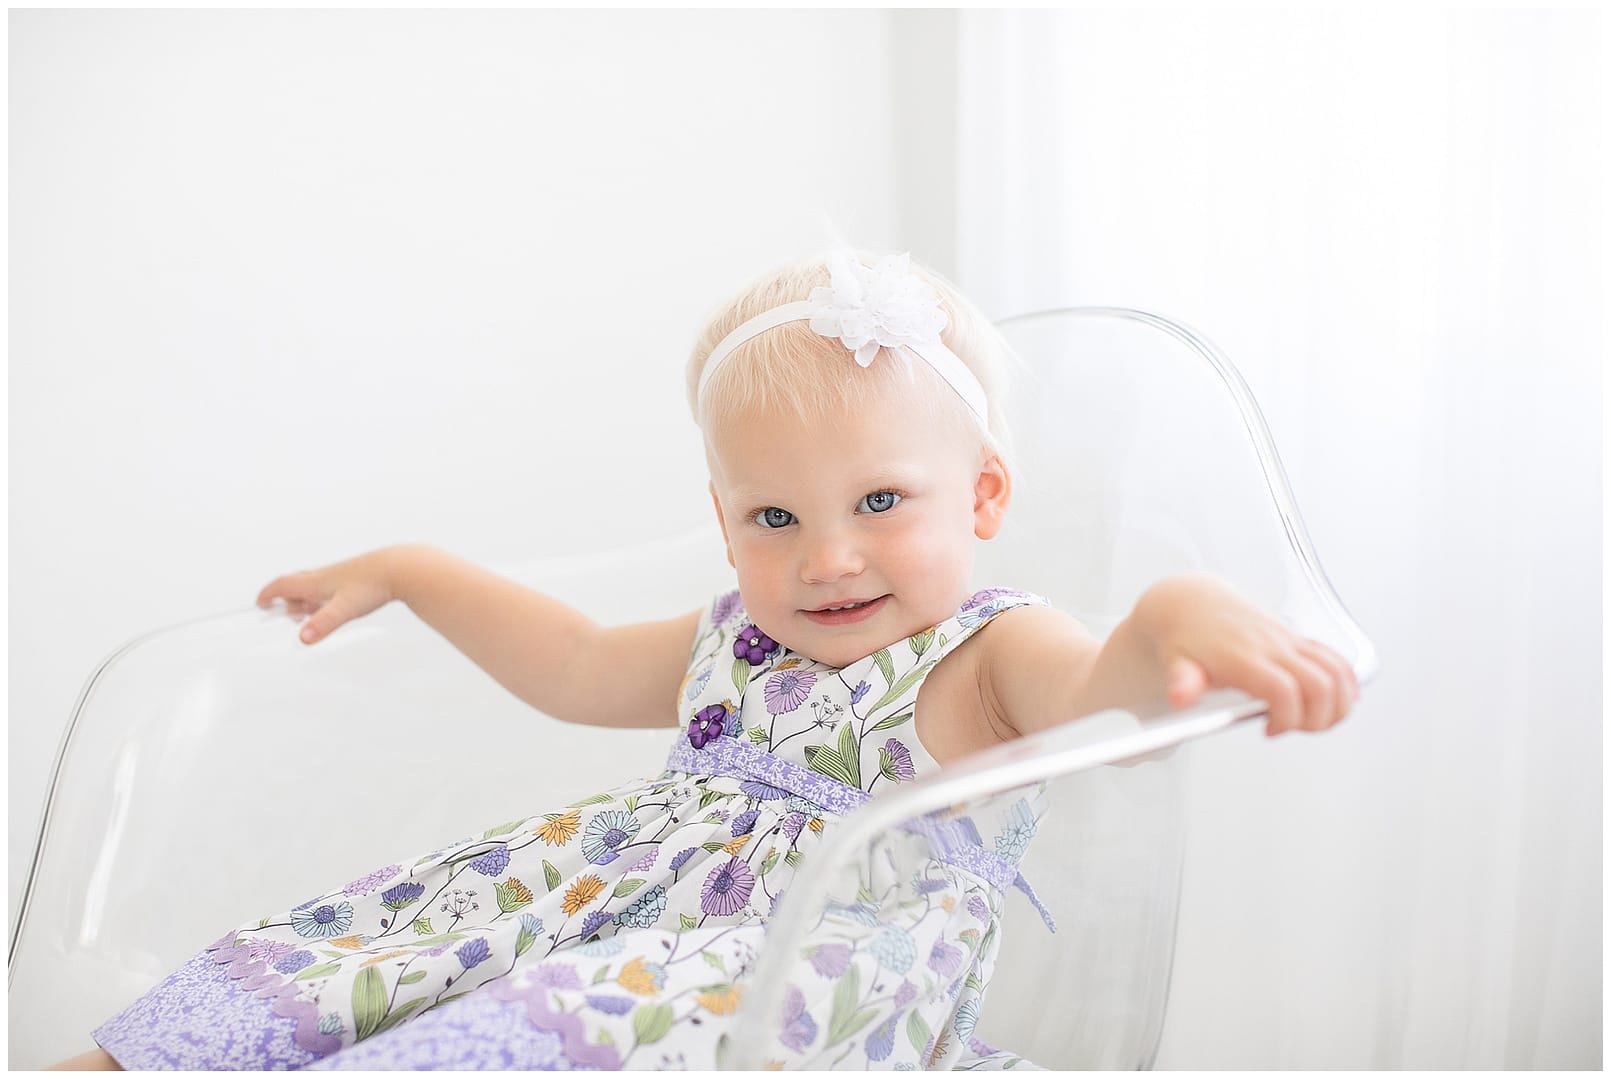 Toddler girl poses for her photograph in studio. Photos by Tiffany Hix Photography.